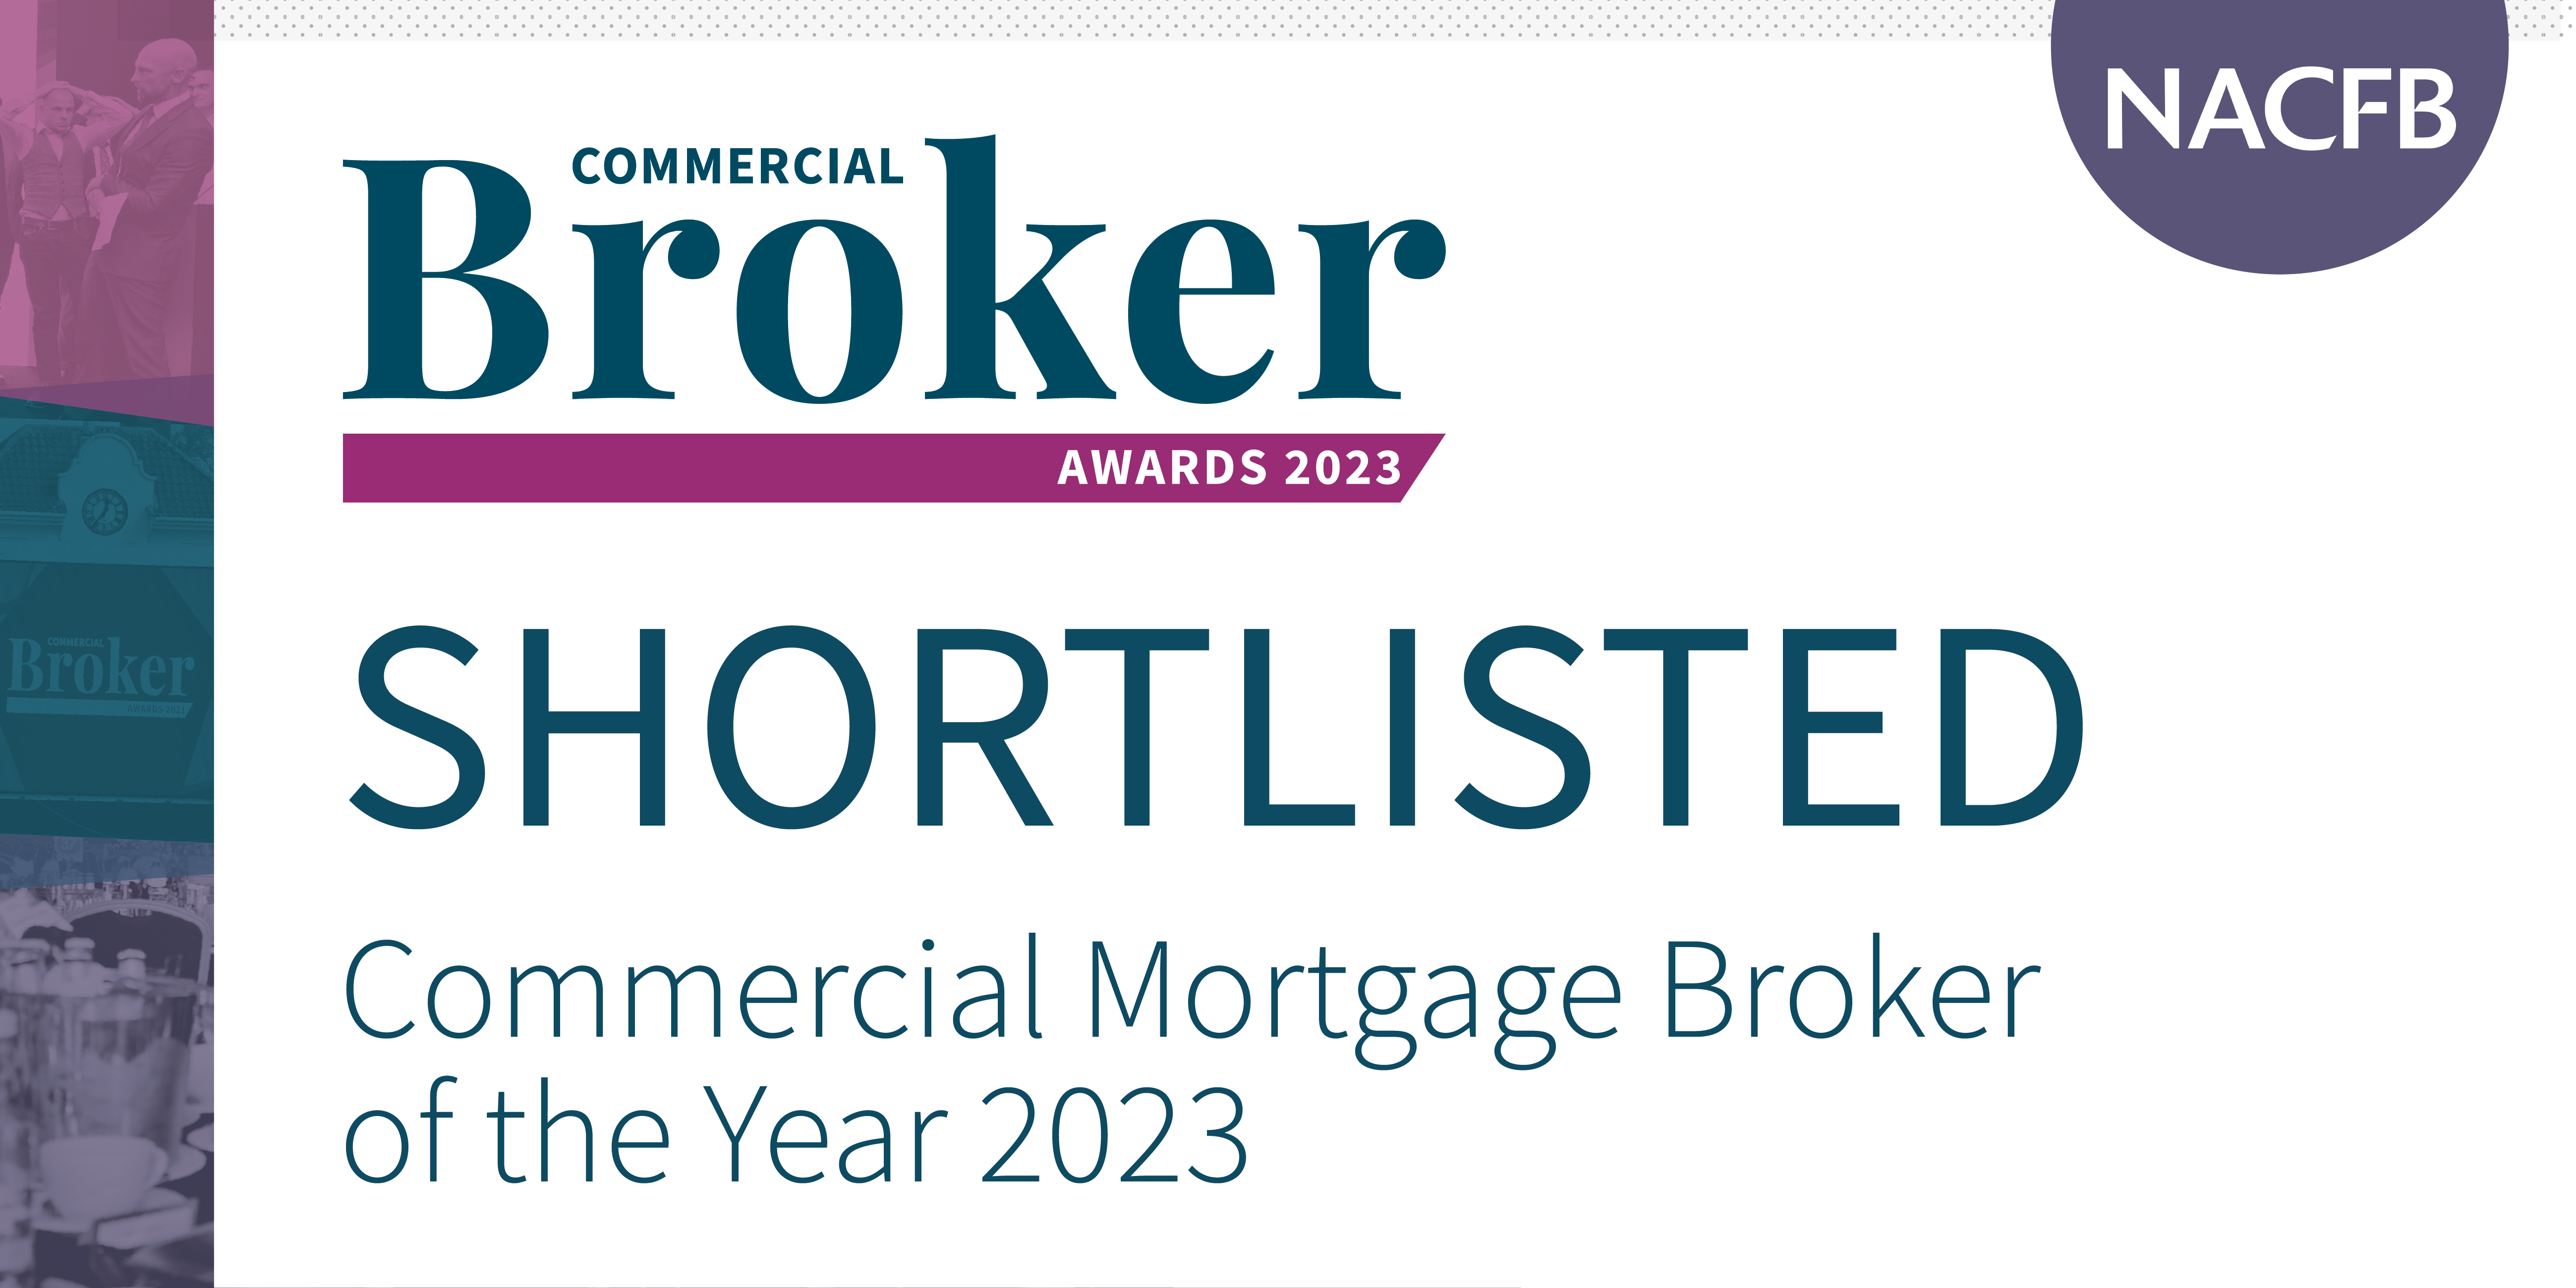 NACFB Commercial Broker Awards 2023 - Shortlisted - Commercial Mortgage Broker of the Year